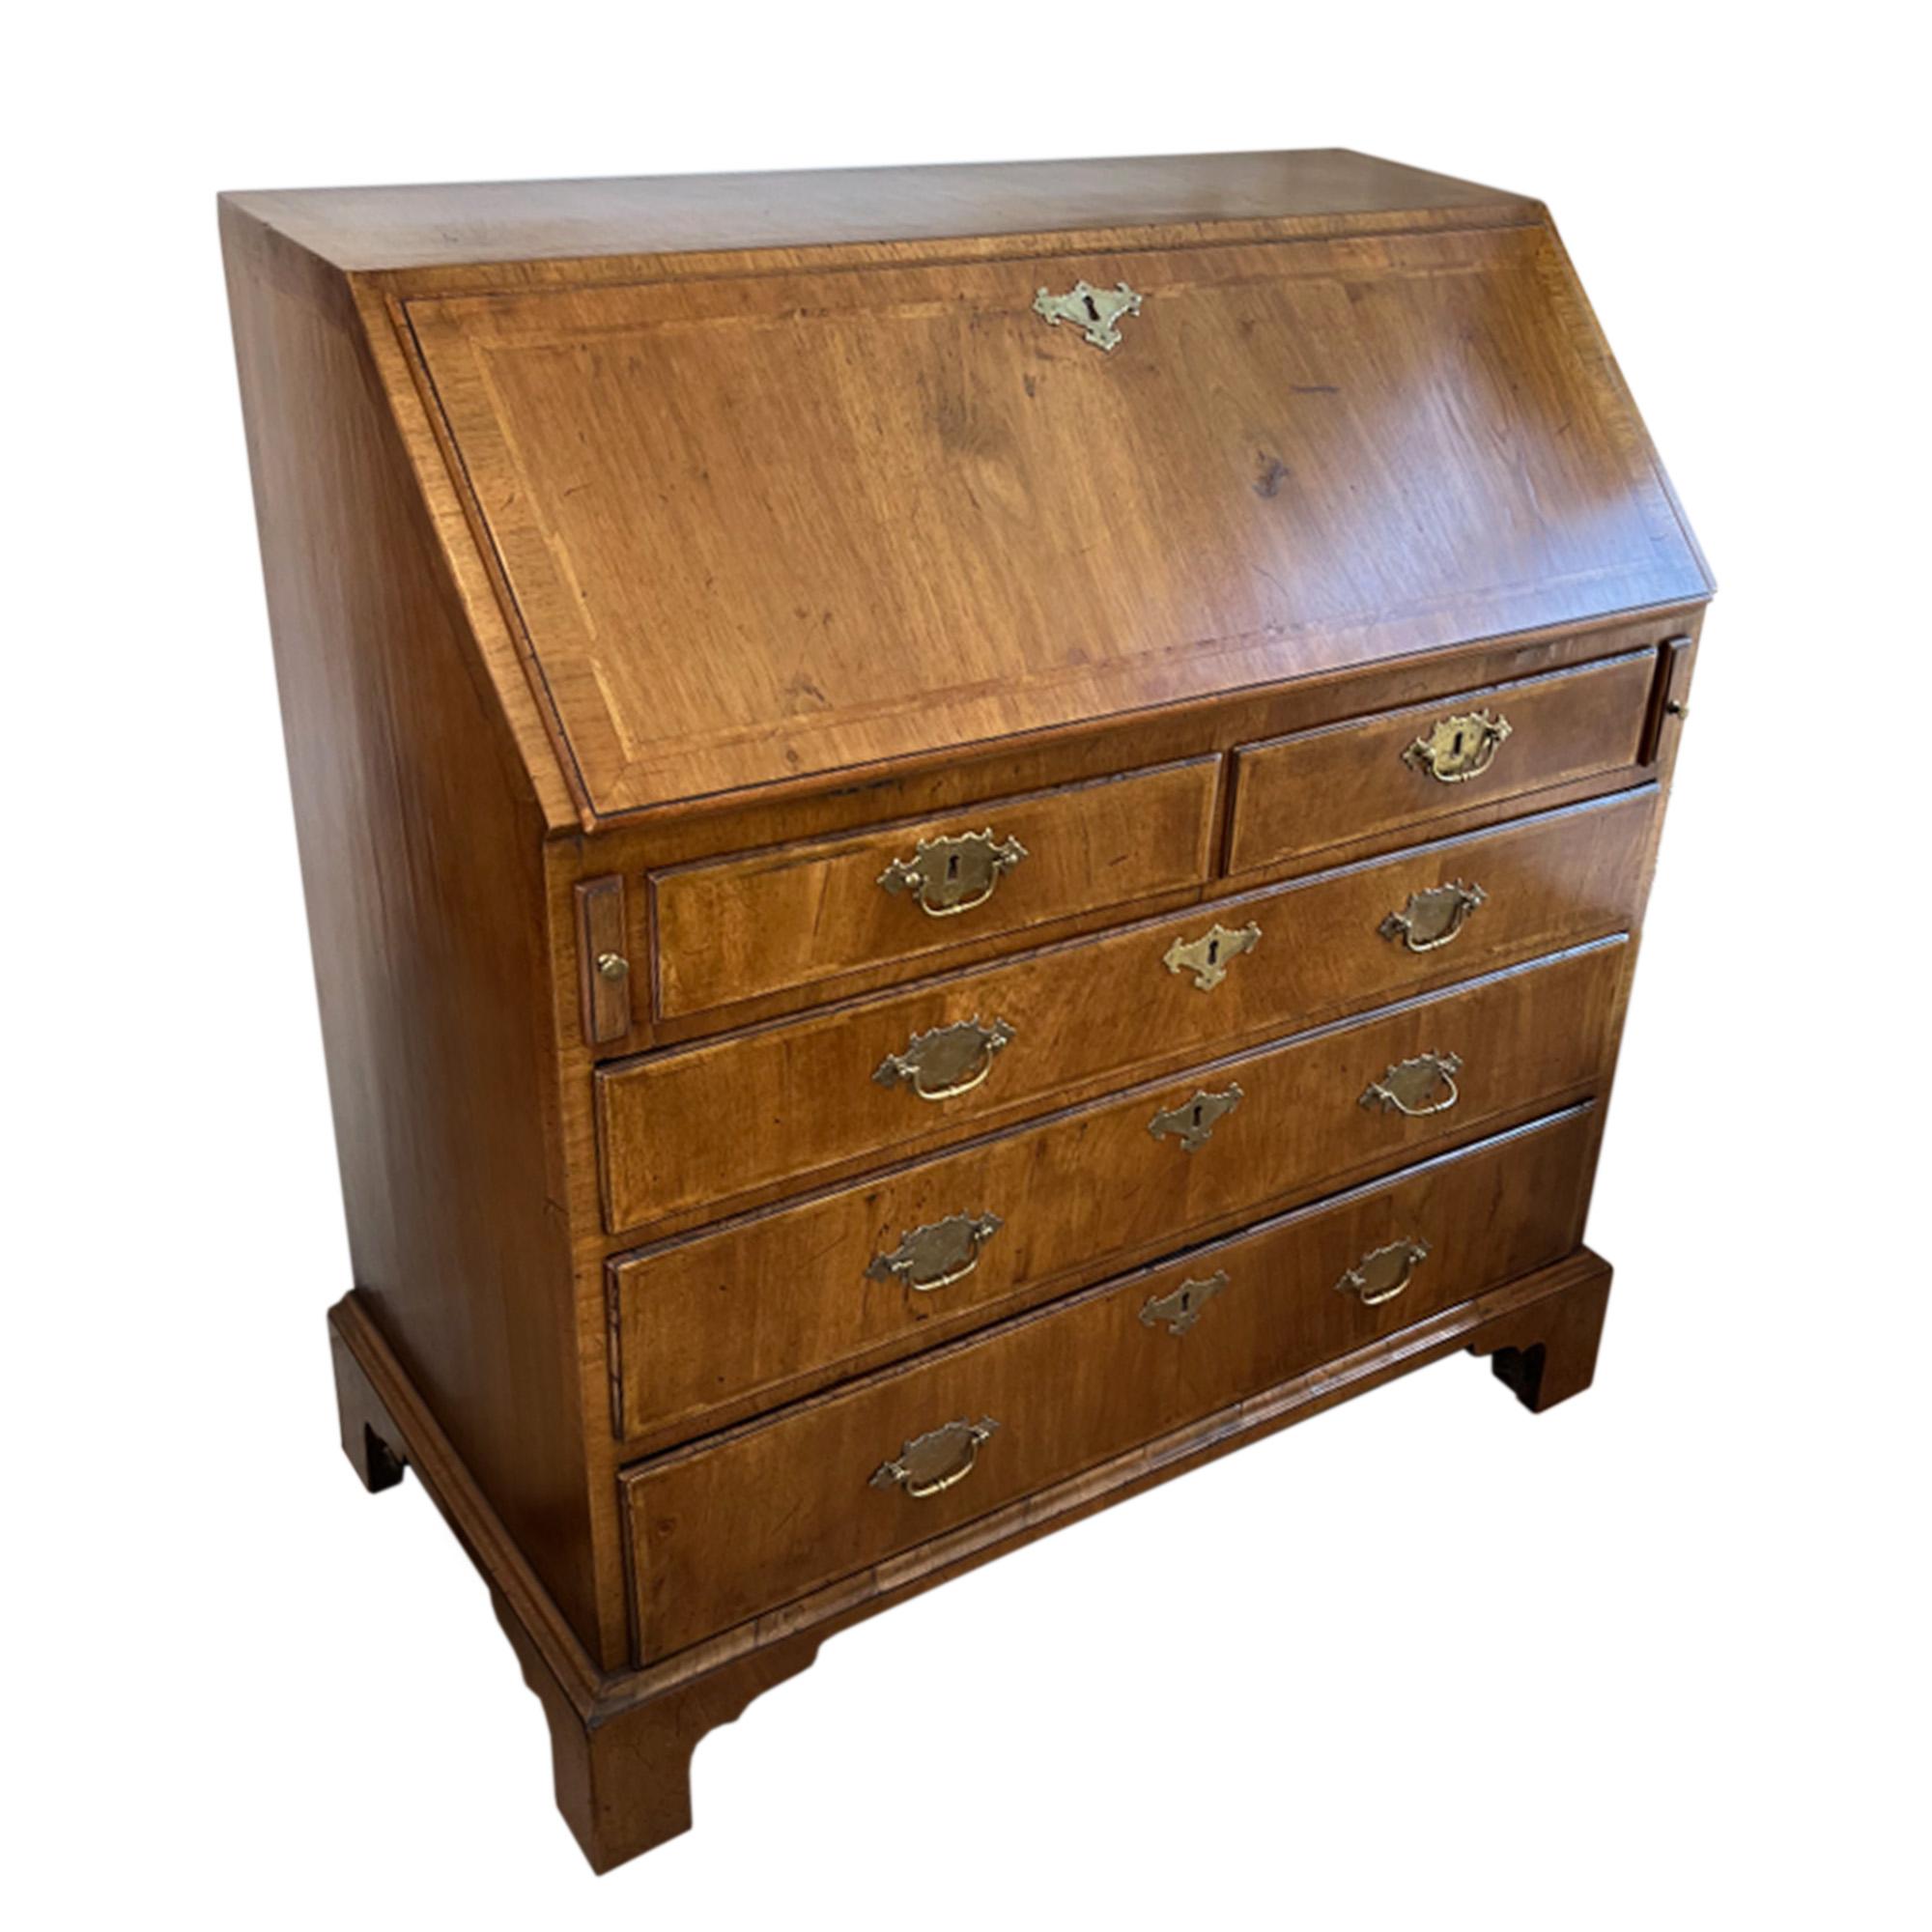 This elegant desk was made in England in the 18th century.

Crafted from walnut, it has a lovely patina.

This piece offers great storage, with several drawers and compartments inside for organisation. The main section has 3 large and 2 smaller